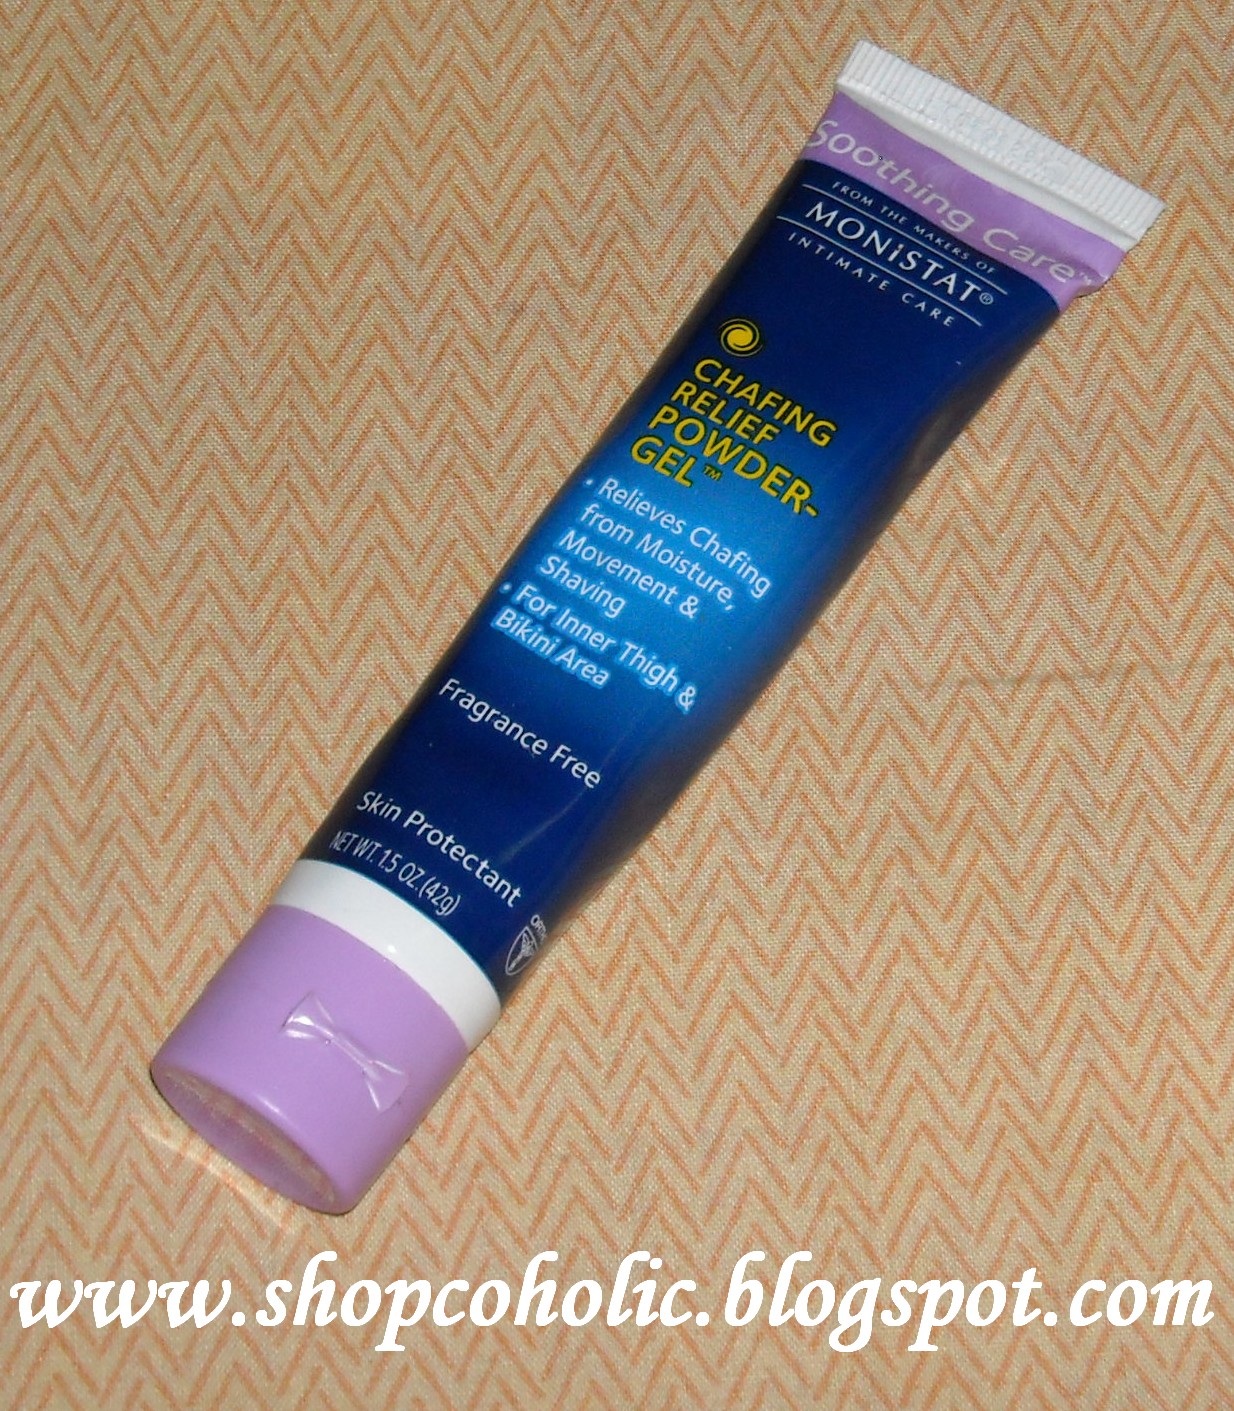 Miss Shopcoholic: Review: Monistat Anti-chafing powder gel (as a